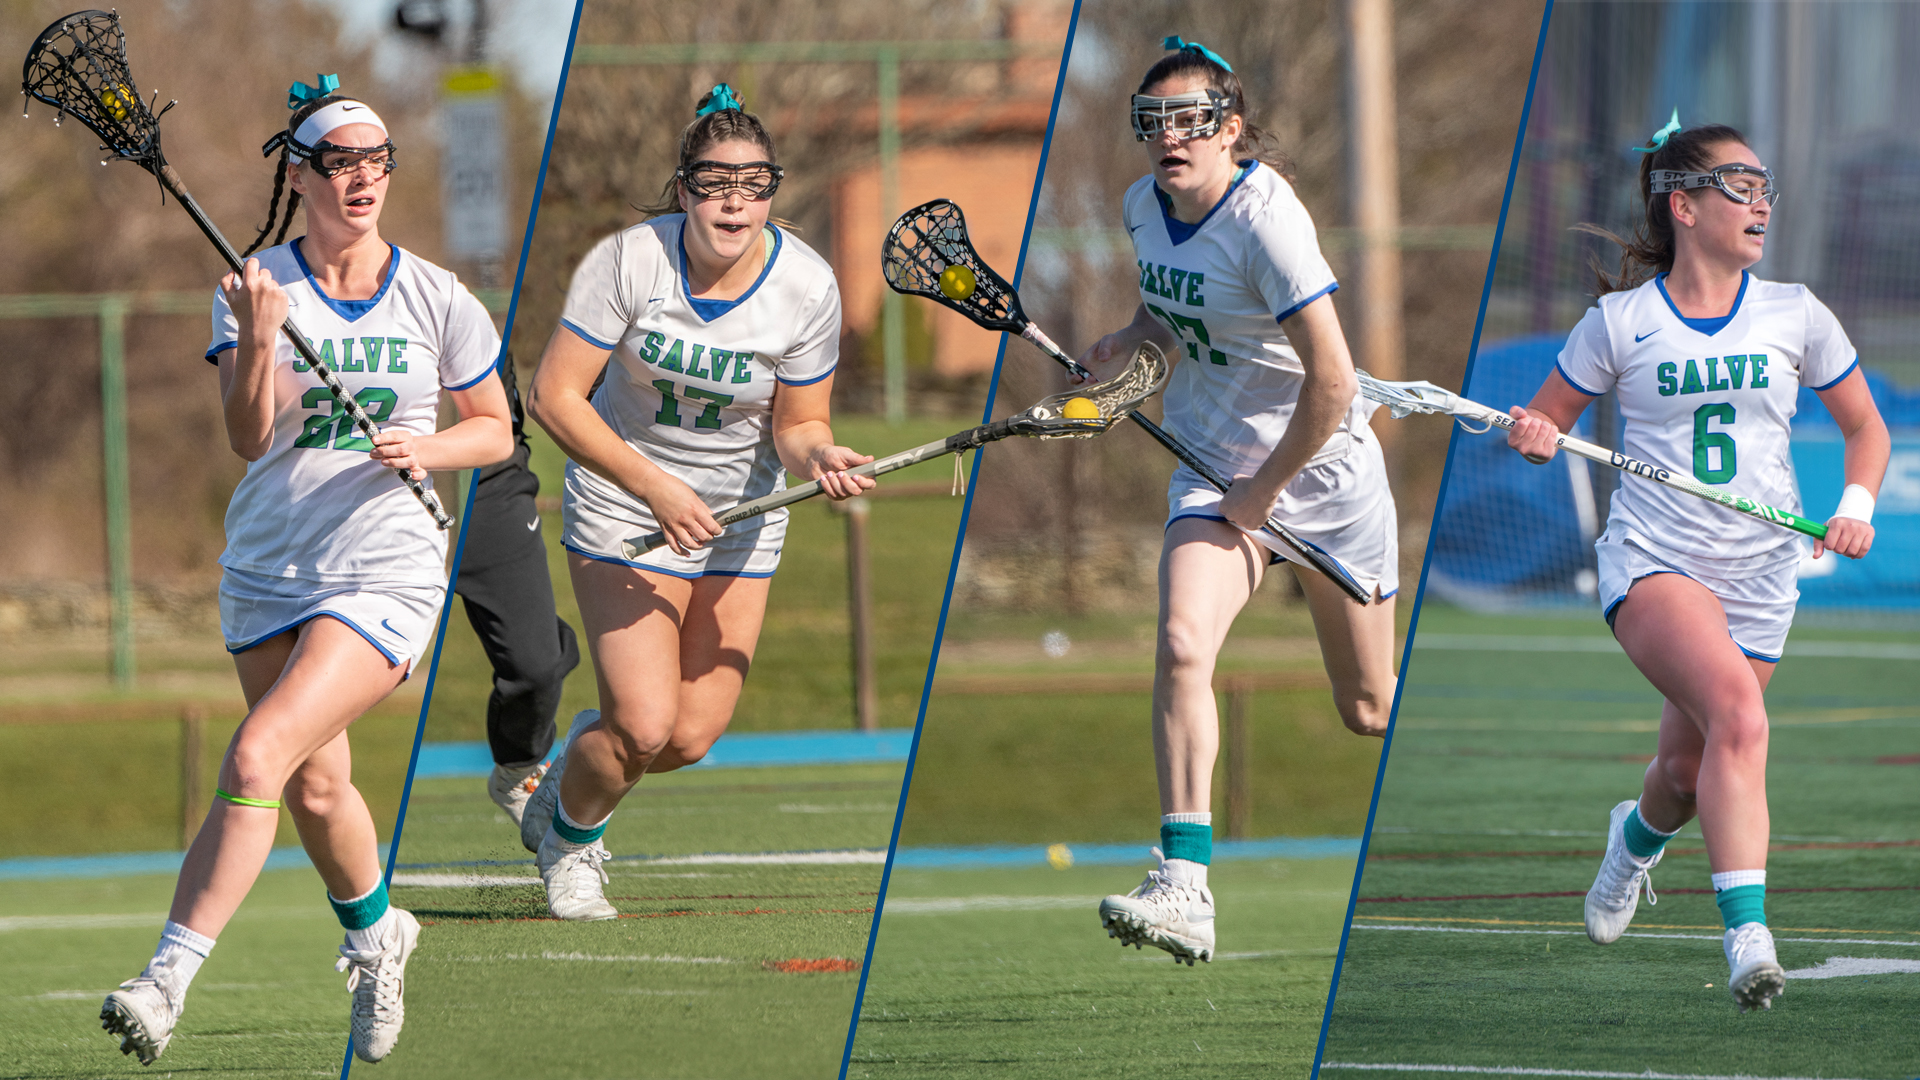 Kerri Beland, Kaity Doherty, Lindsey Smith, and Maddie Villareal made the All-CCC team for Salve Regina.